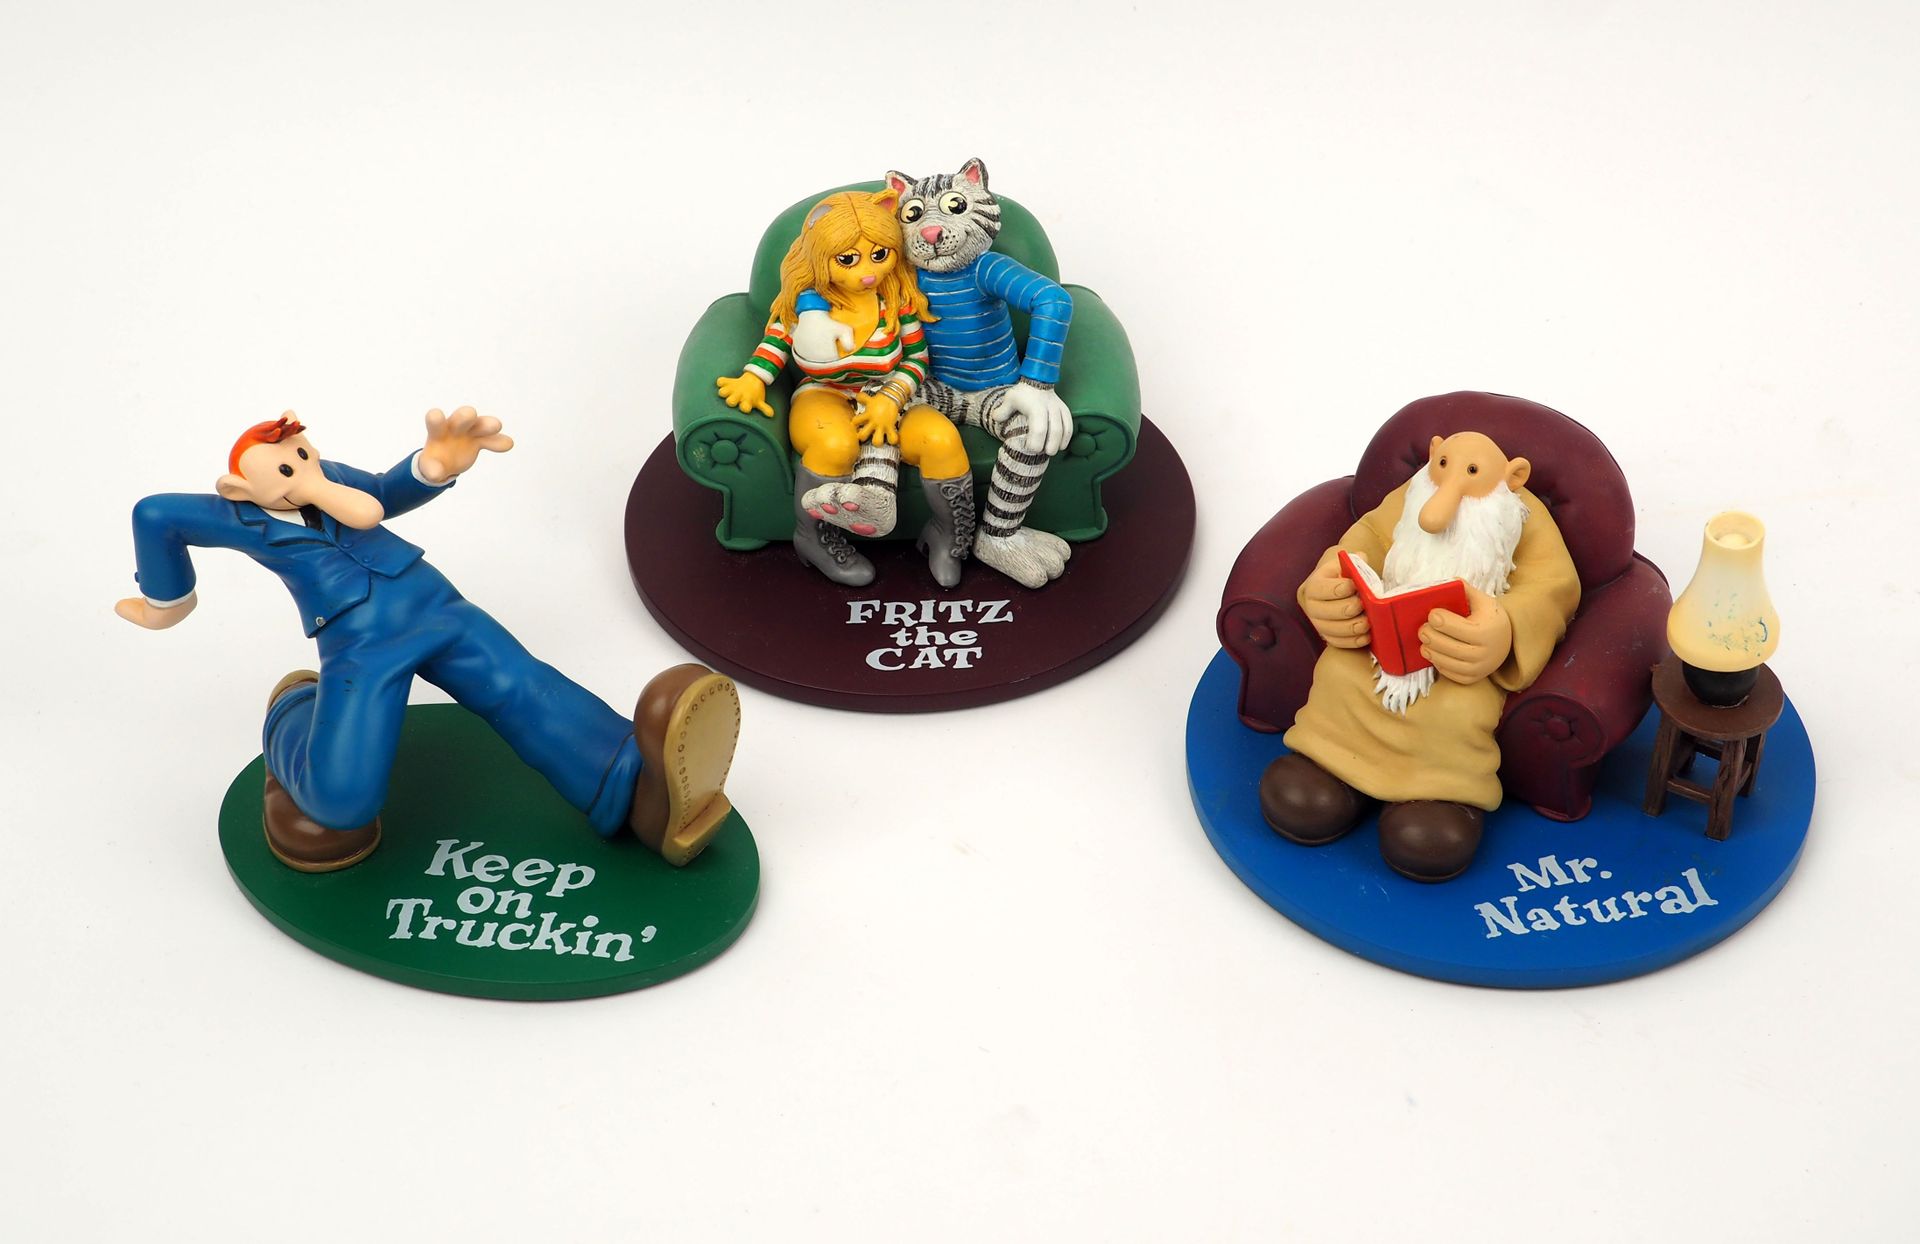 Null CRUMB
Set of three figurines representing Mr Natural, Fritz the cat, and Ke&hellip;